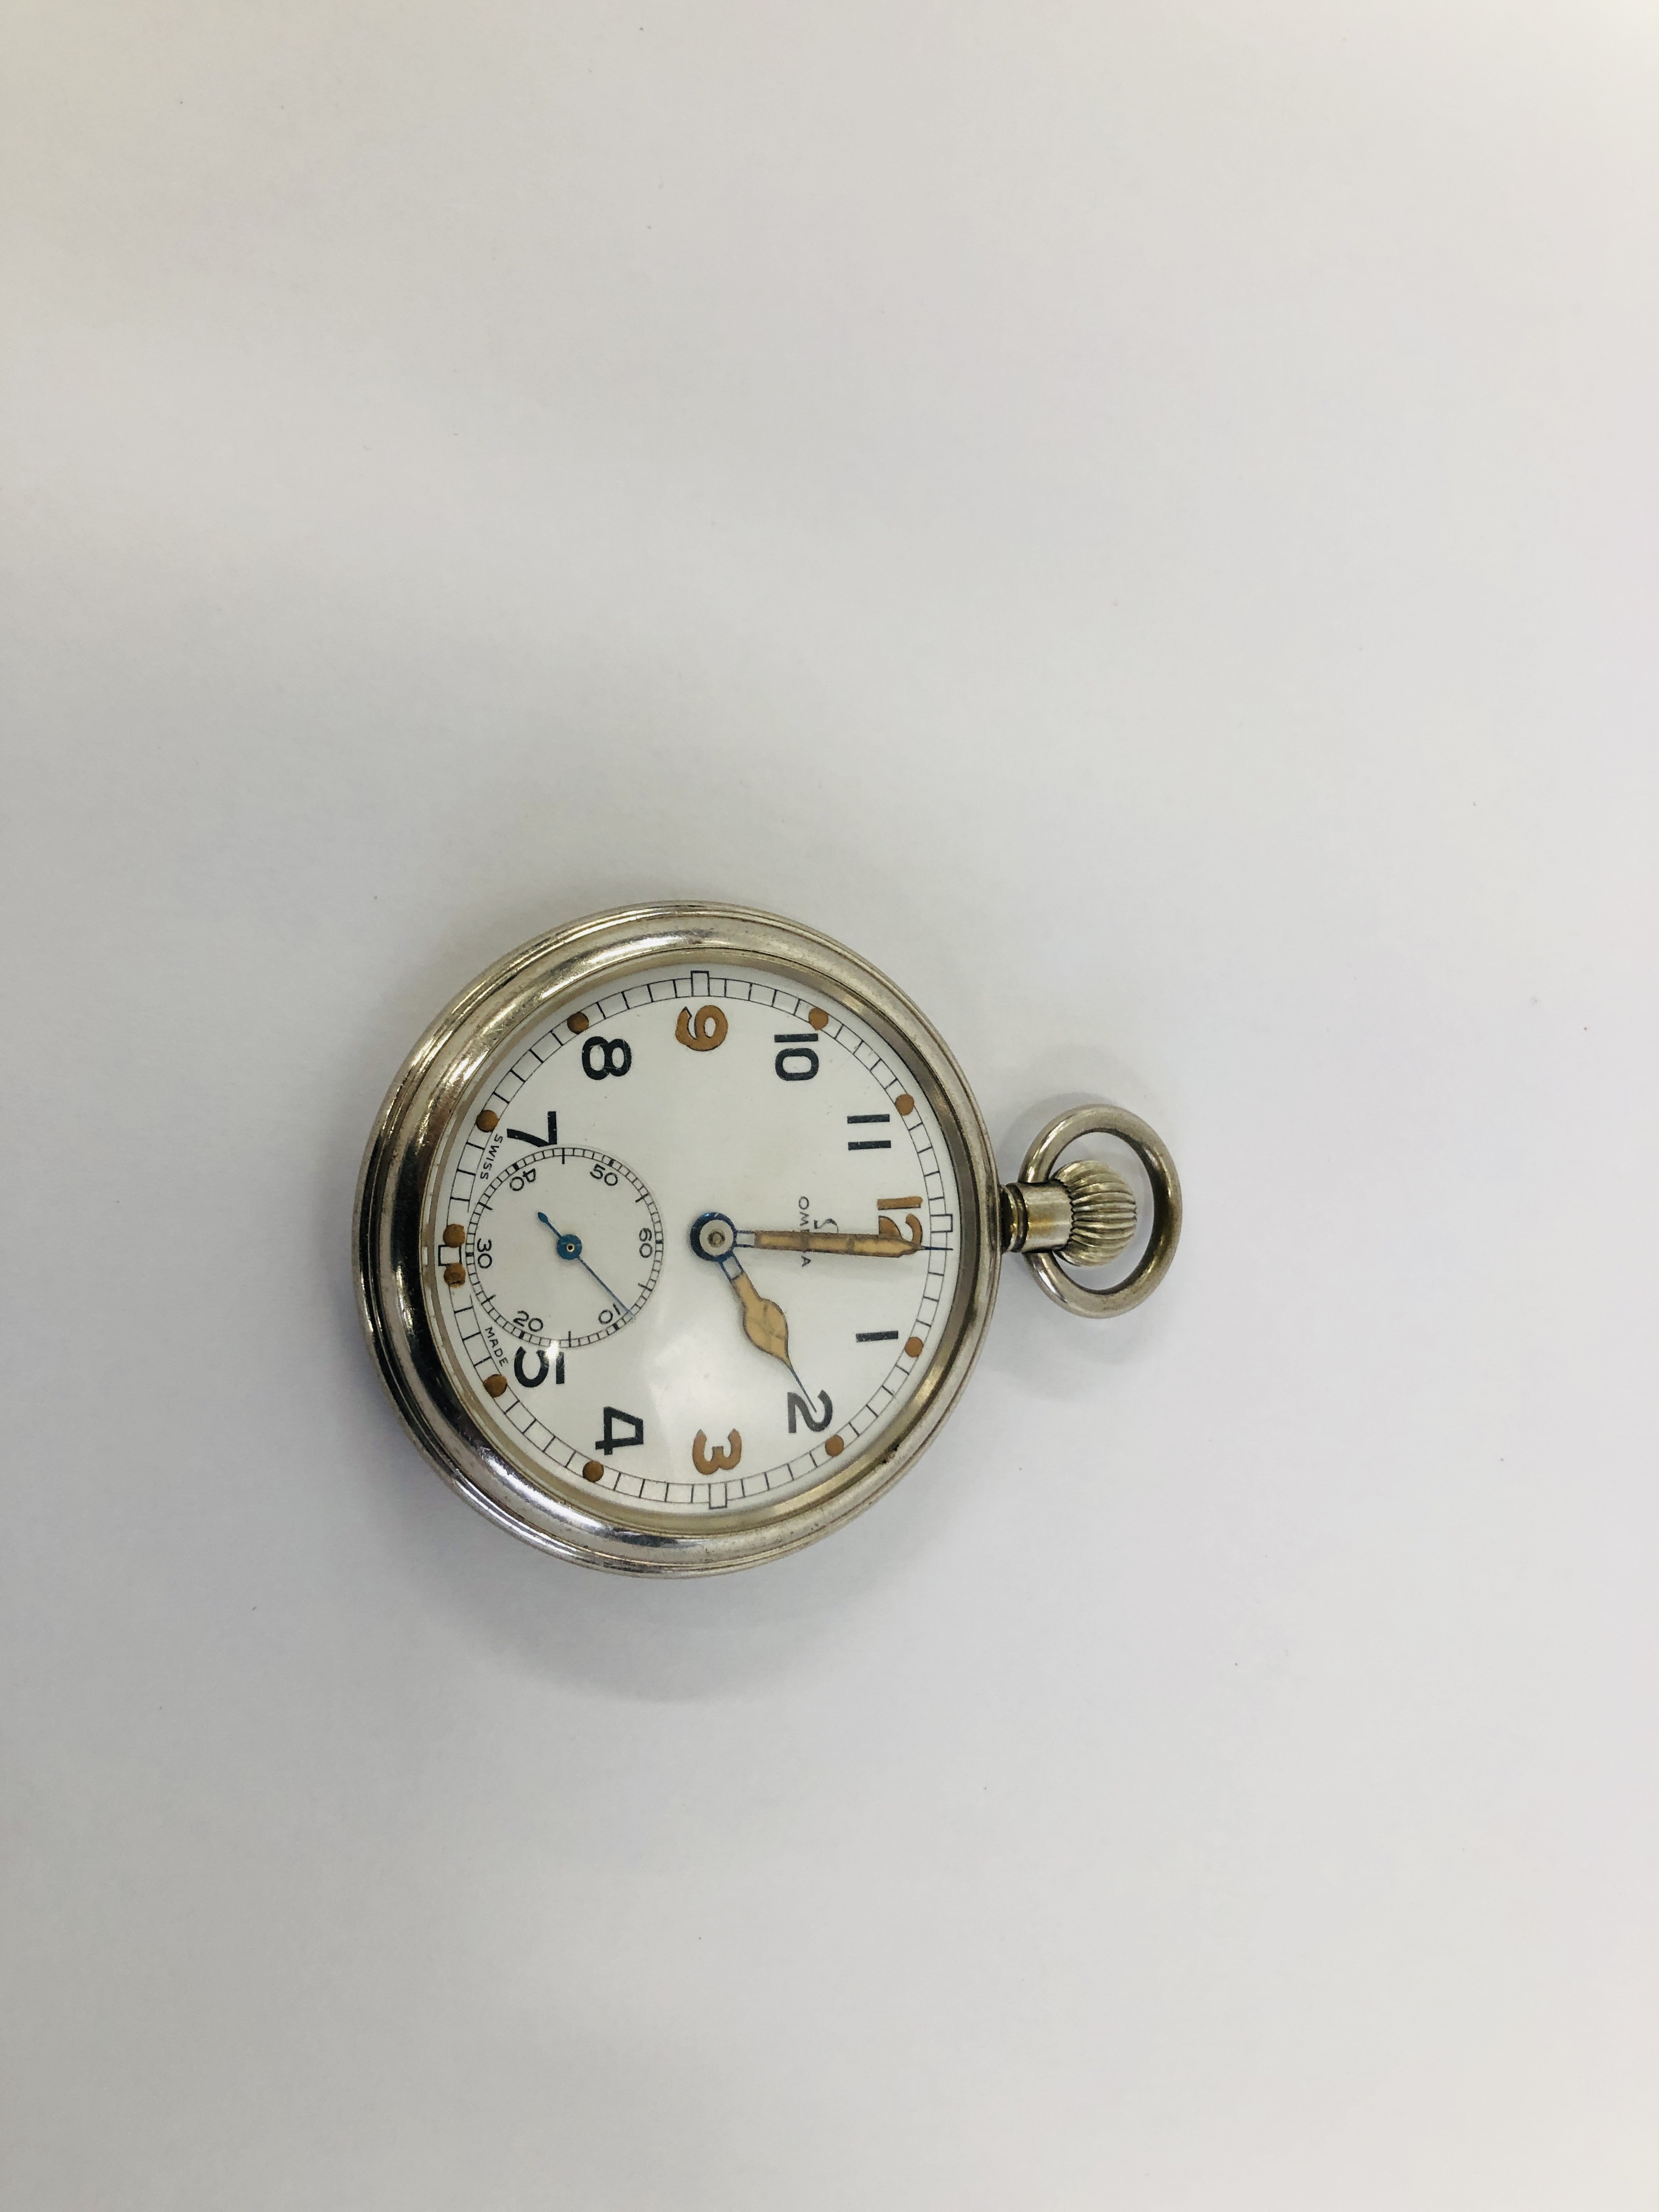 A VINTAGE MILITARY OMEGA POCKET WATCH G.S.T.P. FO51512. - Image 7 of 11